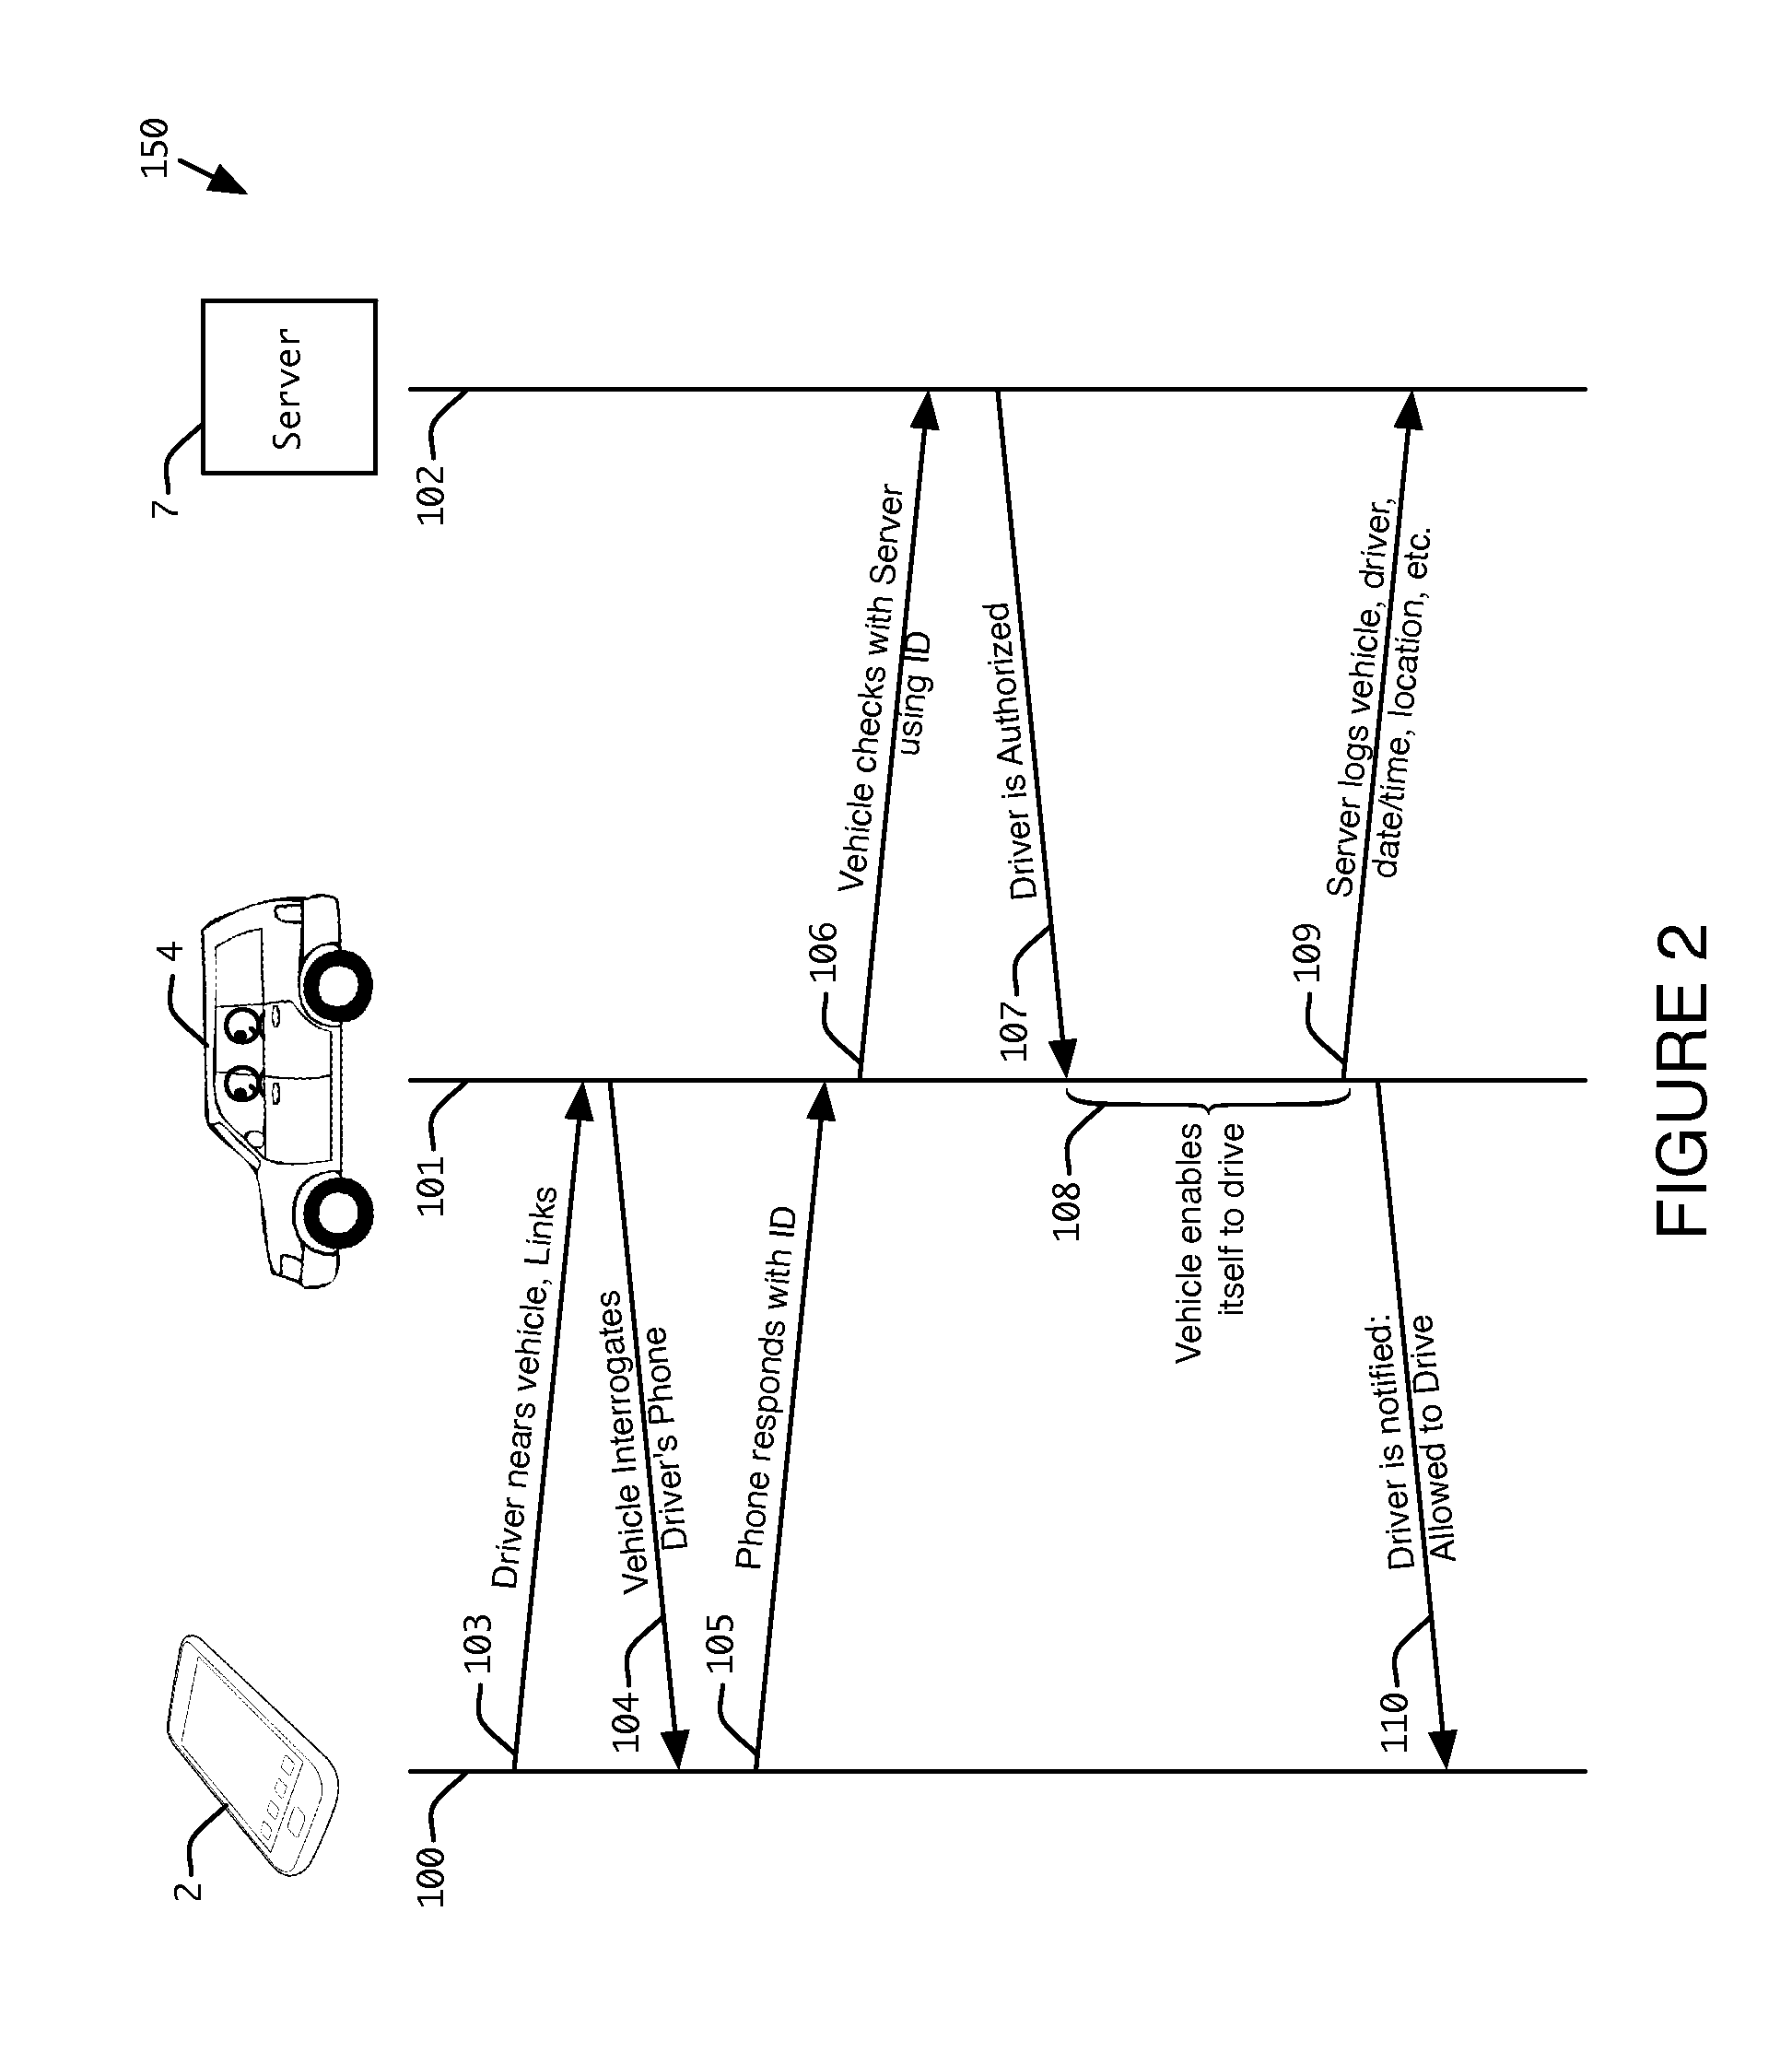 System and Method for Wirelessly Rostering a Vehicle